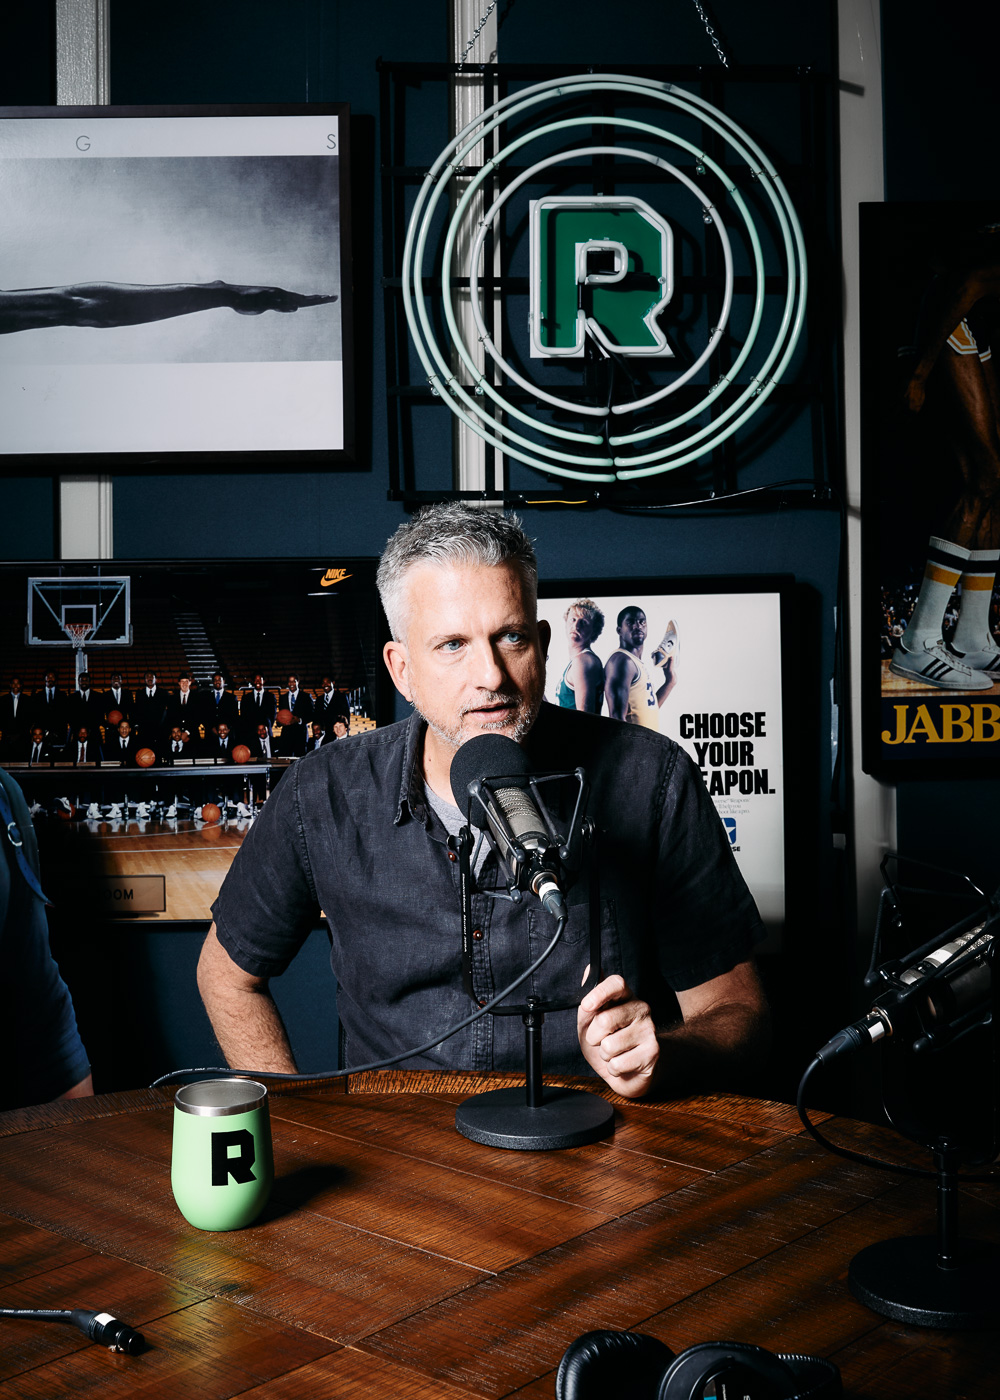 Bill Simmons, sports analyst, author & podcaster